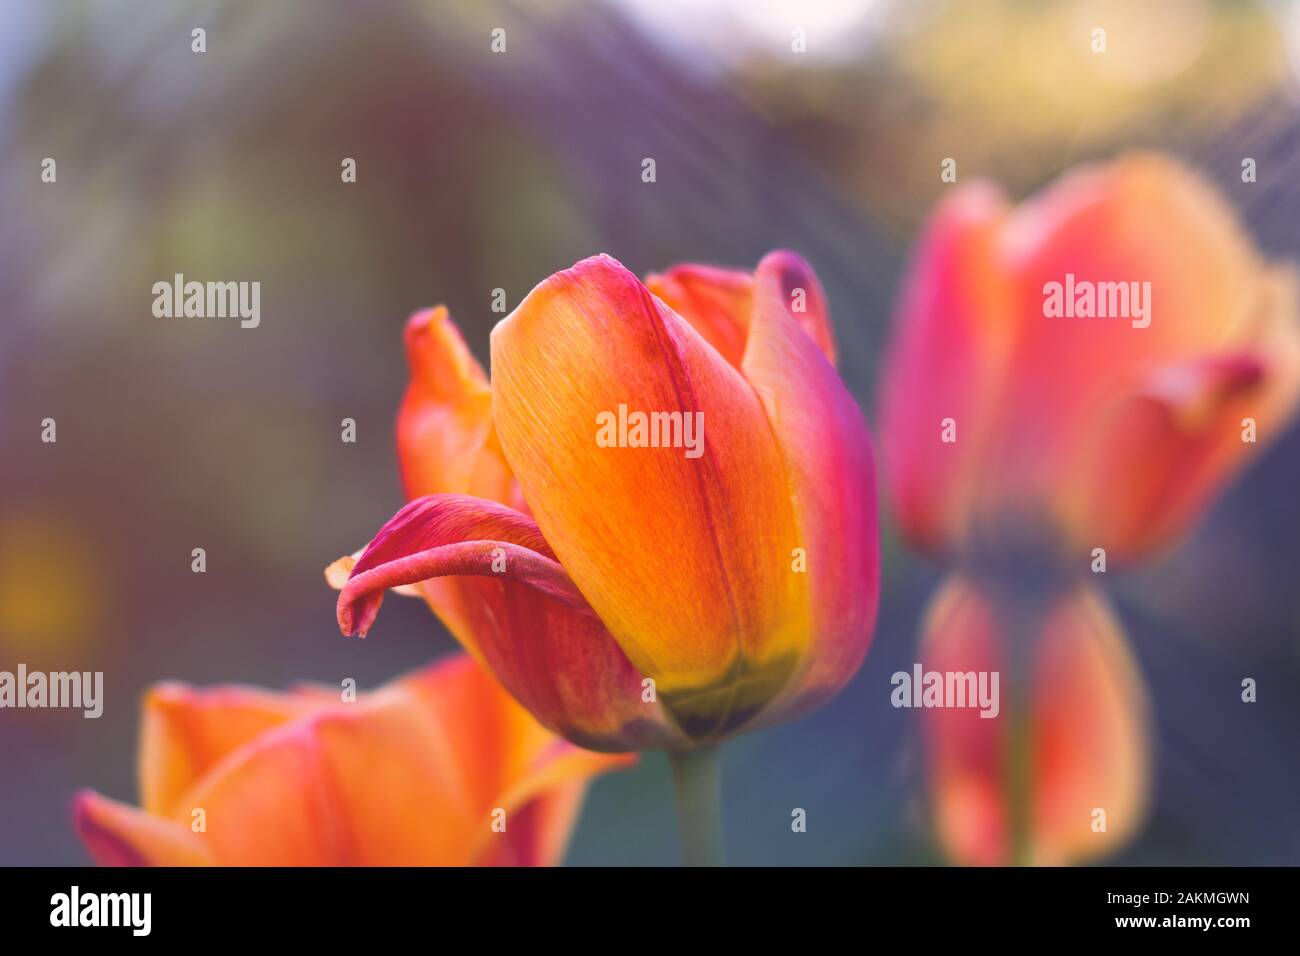 Tulipa Cairo or Triumph Tulip flower closeup with other tulips and bokeh in background at sunset. Stock Photo